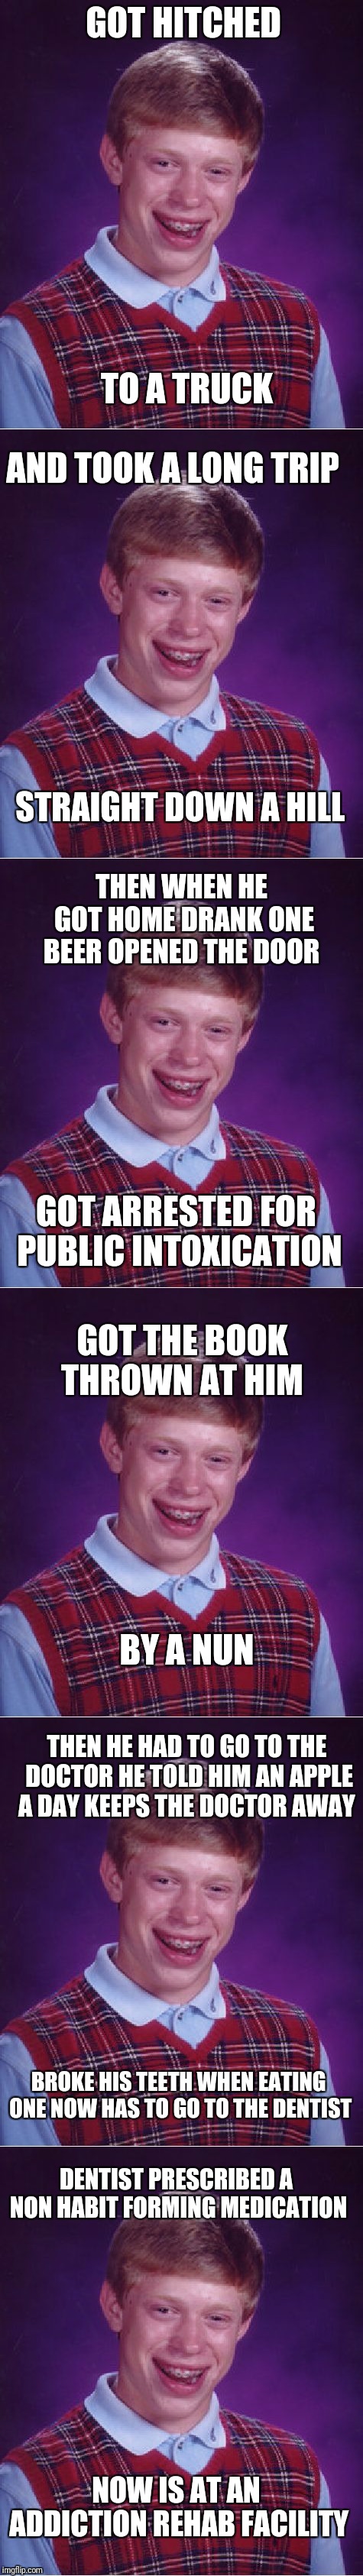 This Is The Story Of Bad Luck Brian A meme mashup for MEME MASHUP WEEK Sep 24th - Sep 28th (A 44colt event) Info below | GOT HITCHED; TO A TRUCK; AND TOOK A LONG TRIP; STRAIGHT DOWN A HILL; THEN WHEN HE GOT HOME DRANK ONE BEER OPENED THE DOOR; GOT ARRESTED FOR PUBLIC INTOXICATION; GOT THE BOOK THROWN AT HIM; BY A NUN; THEN HE HAD TO GO TO THE DOCTOR HE TOLD HIM AN APPLE A DAY KEEPS THE DOCTOR AWAY; BROKE HIS TEETH WHEN EATING ONE NOW HAS TO GO TO THE DENTIST; DENTIST PRESCRIBED A NON HABIT FORMING MEDICATION; NOW IS AT AN ADDICTION REHAB FACILITY | image tagged in memes,bad luck brian,meme mashup week,funny,44colt | made w/ Imgflip meme maker